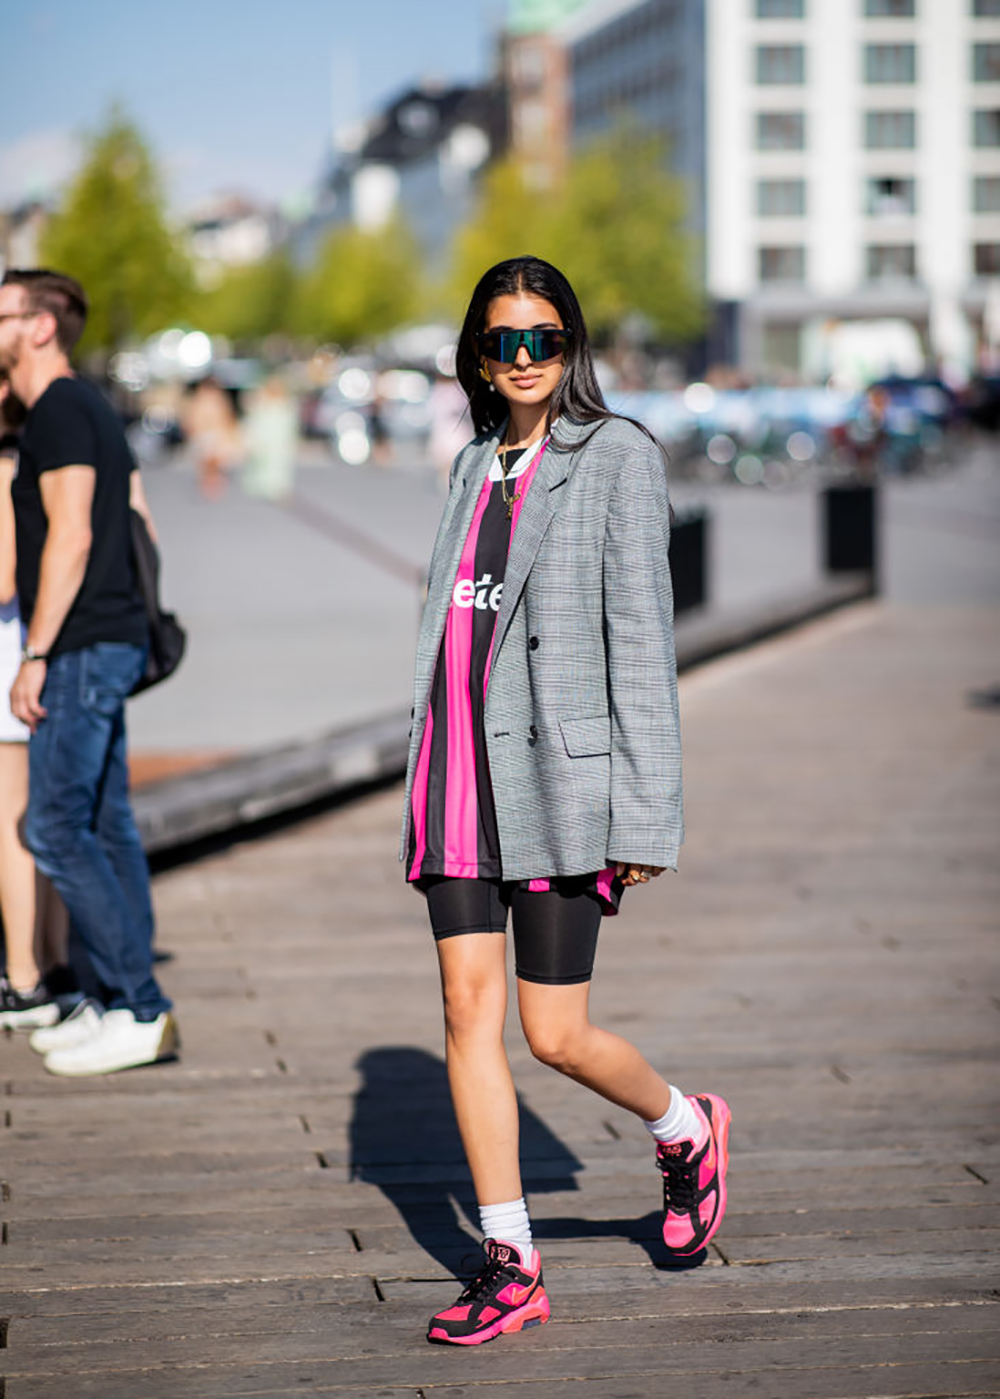 COPENHAGEN, DENMARK - AUGUST 09: A guest wearing striped tshirt, cycle pants, grey blazer jacket is seen outside Munthe during the Copenhagen Fashion Week Spring/Summer 2019 on August 9, 2018 in Copenhagen, Denmark. (Photo by Christian Vierig/Getty Images)